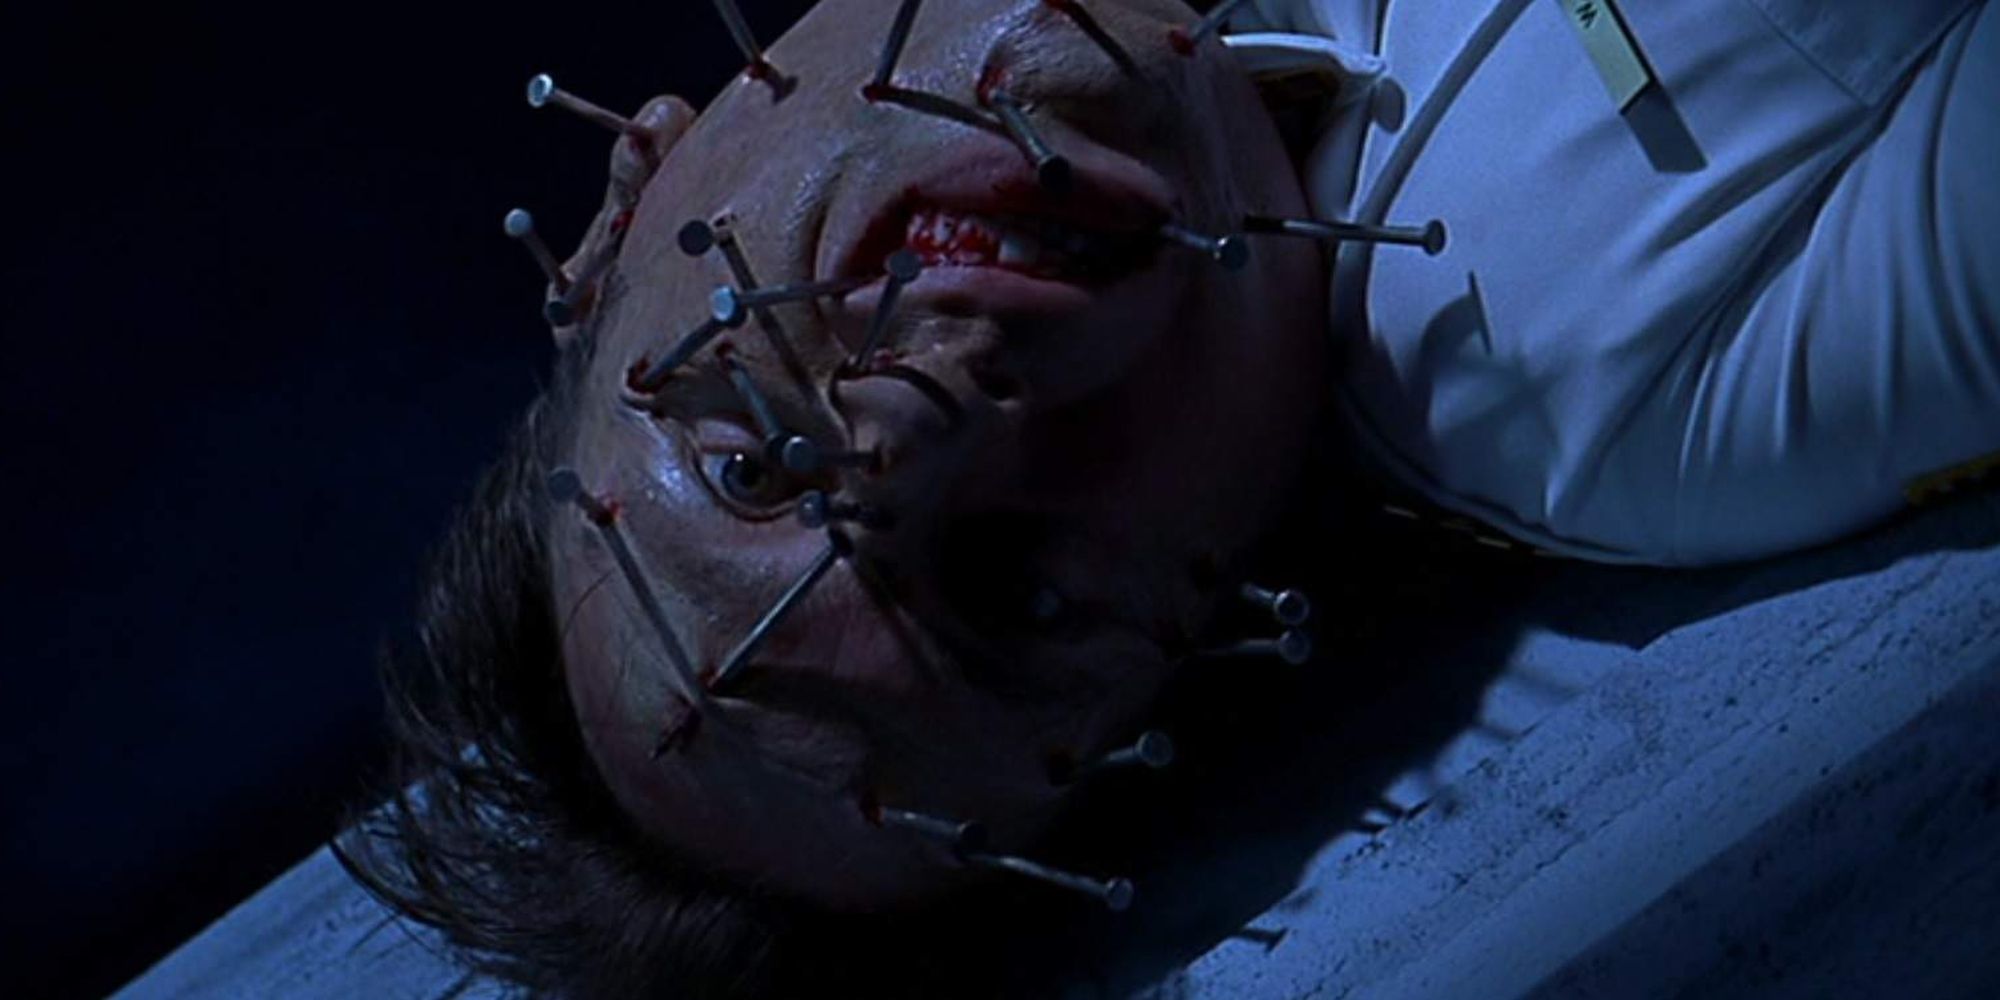 Kincaid being killed by nails to the face in Bride Of Chucky (1998)